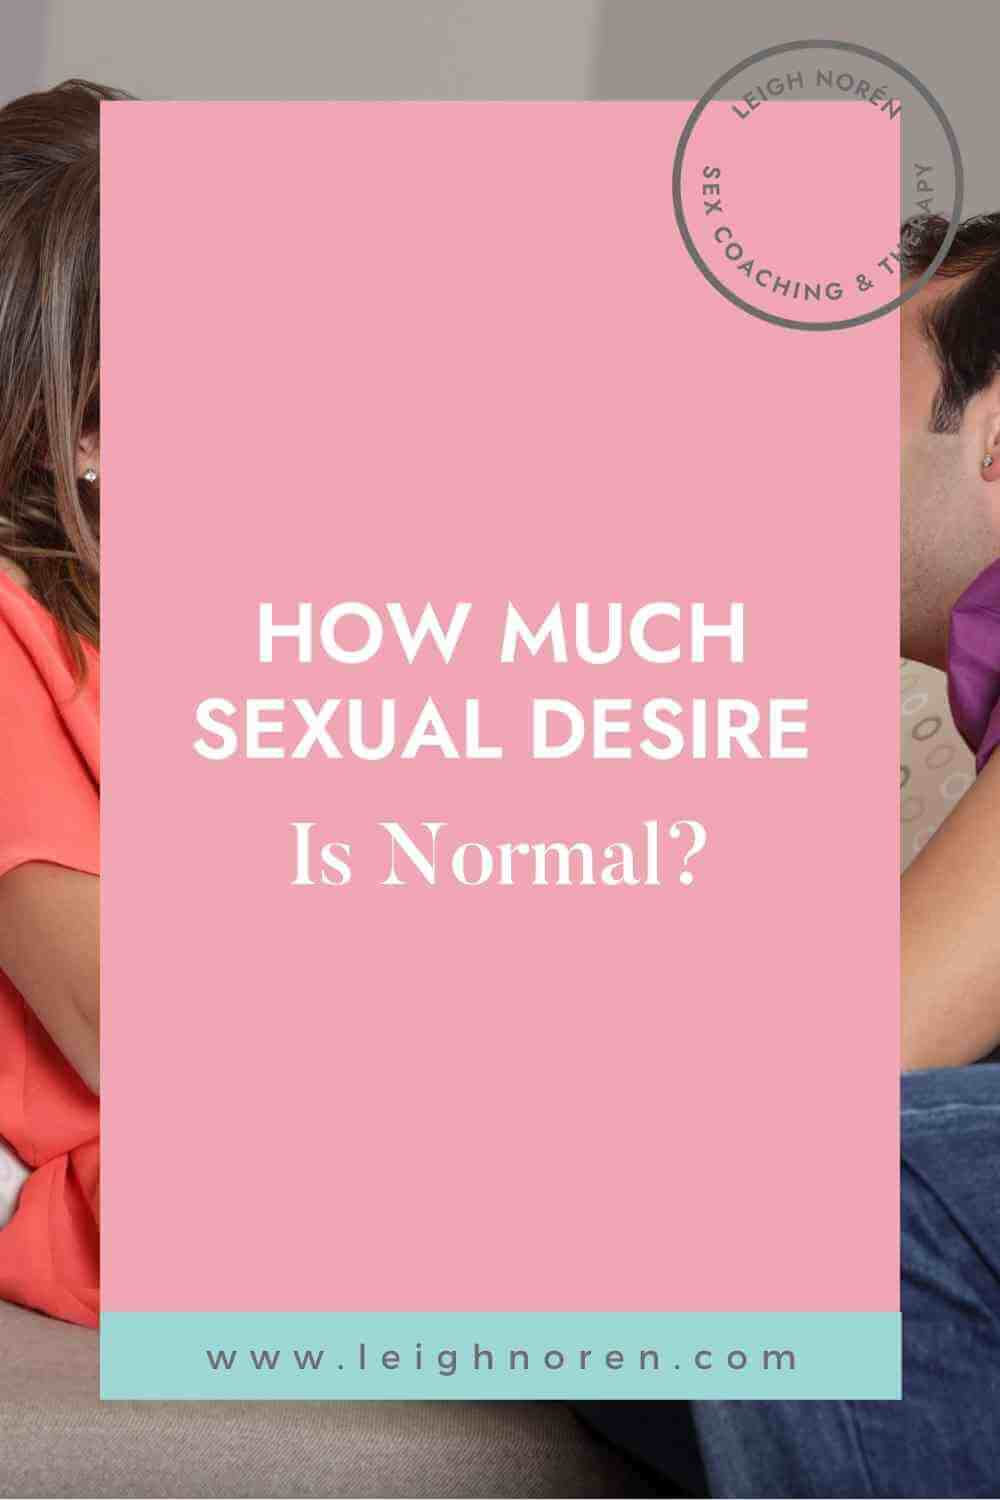 How Much Sexual Desire Is Normal?